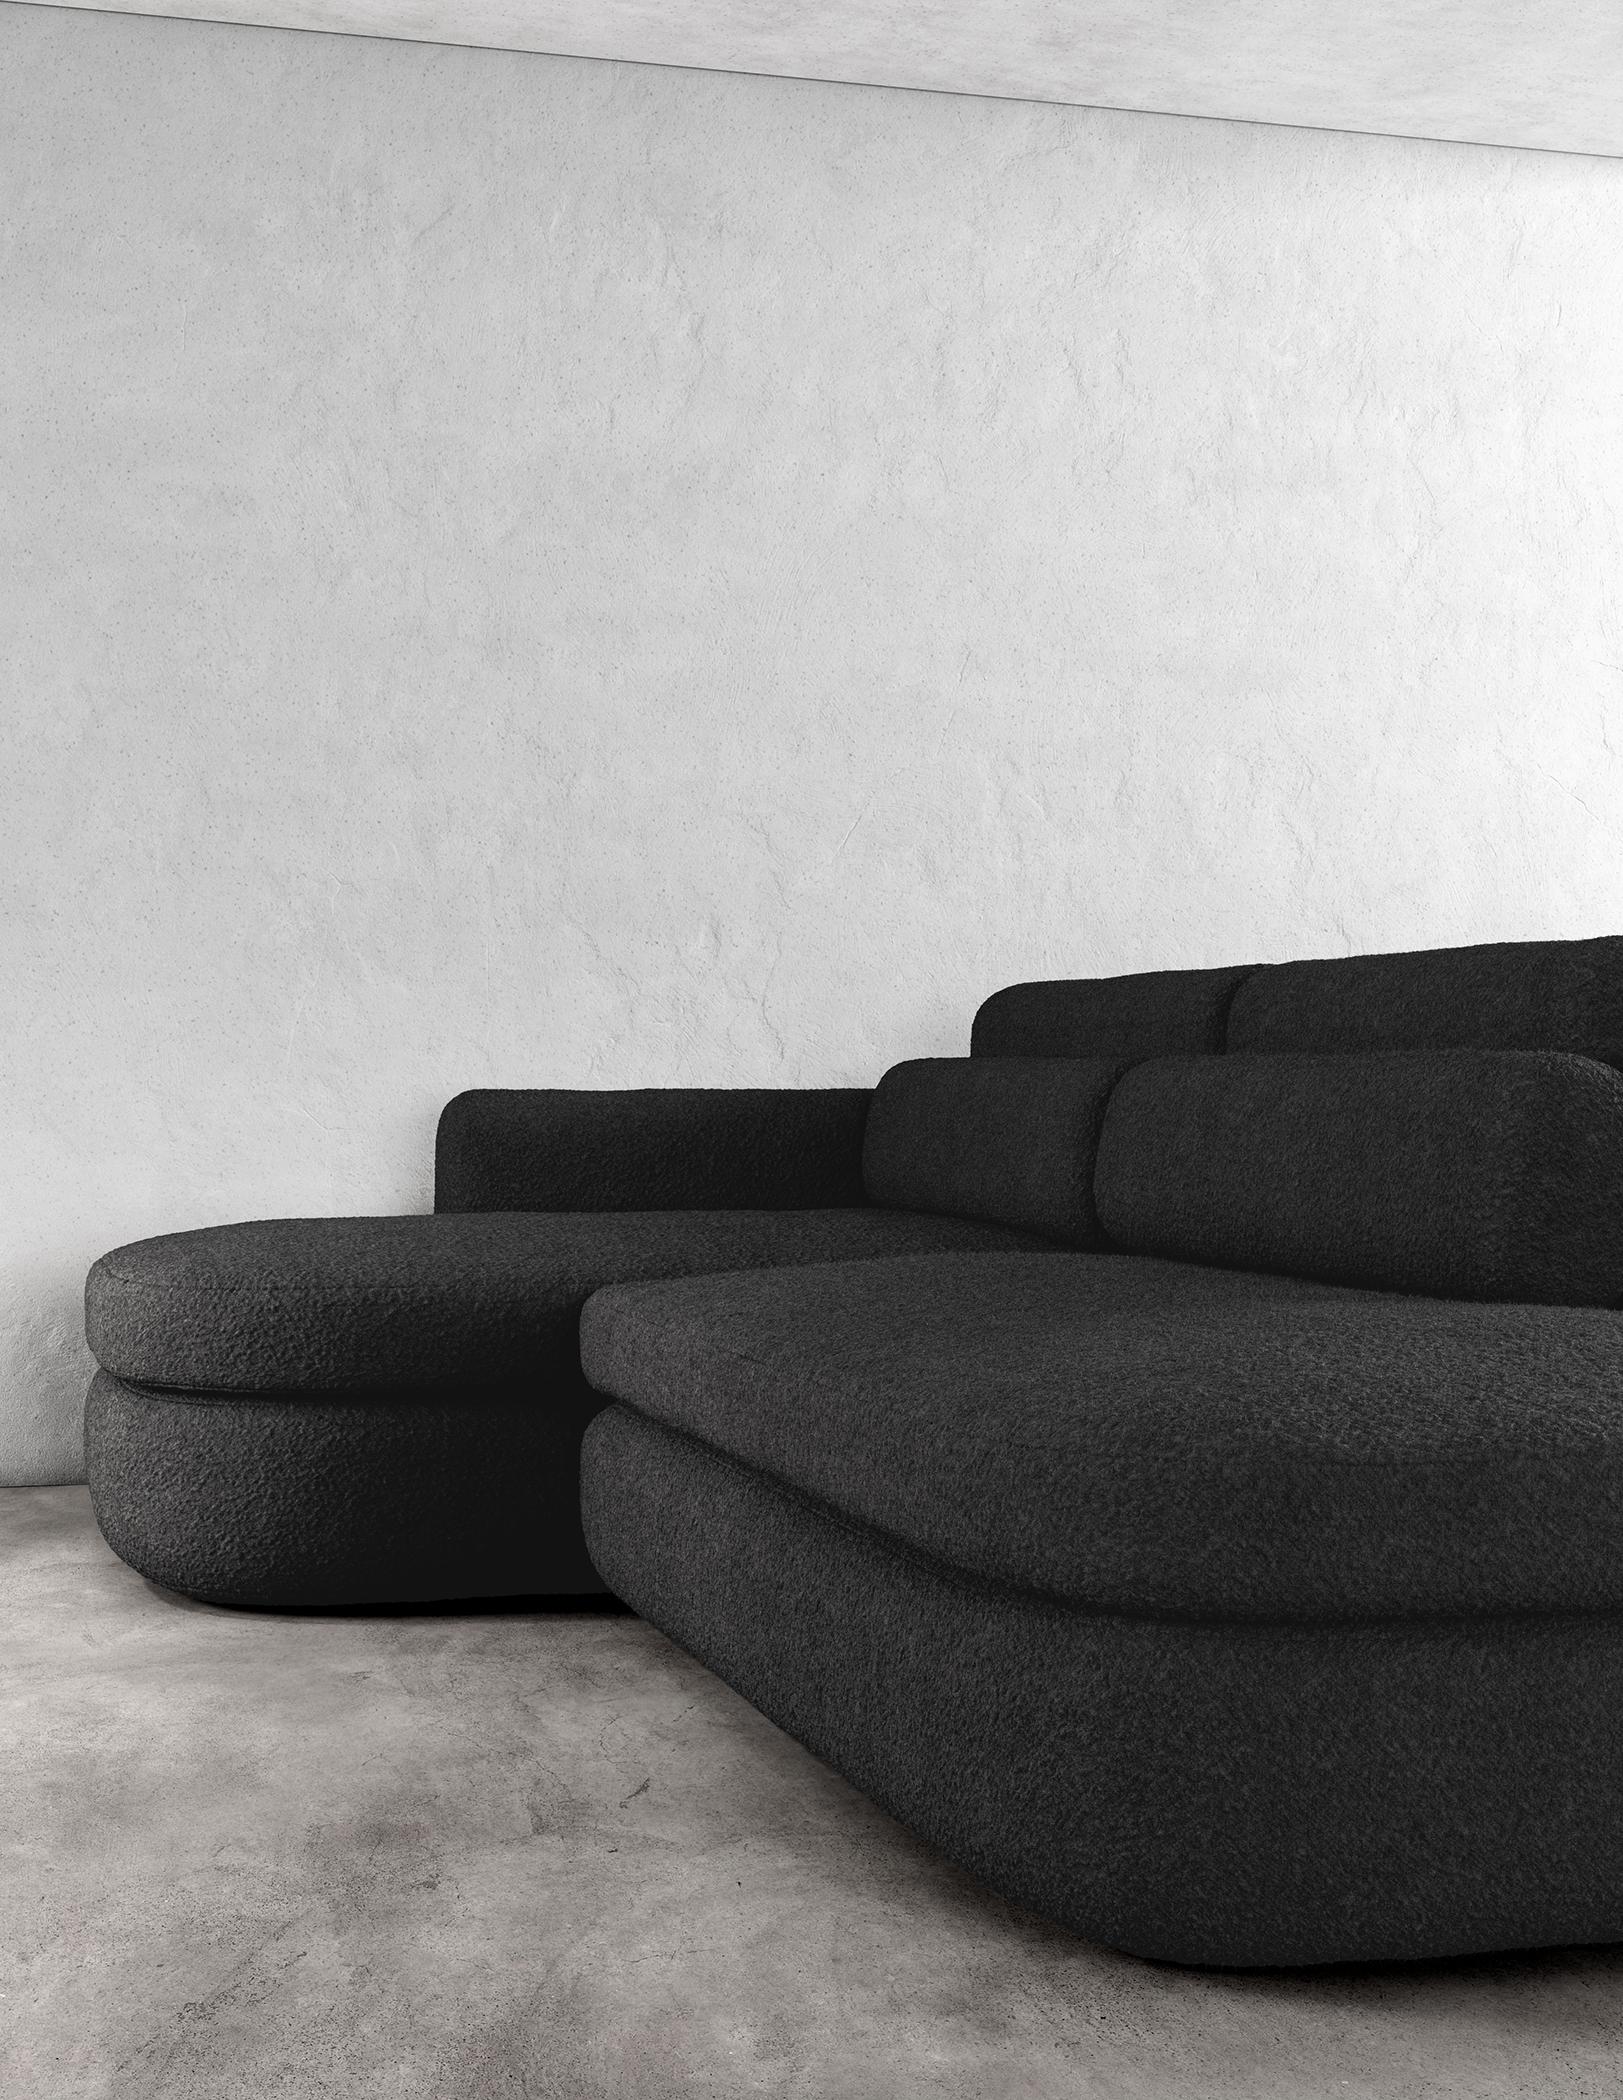 ASYM SECTIONAL - Modern Asymmetrical Sectional Sofa in Black Boucle

The Asym Sectional sofa is a stunning piece of furniture that is both sophisticated and simple, featuring asymmetrical design elements that create a unique and modern aesthetic.